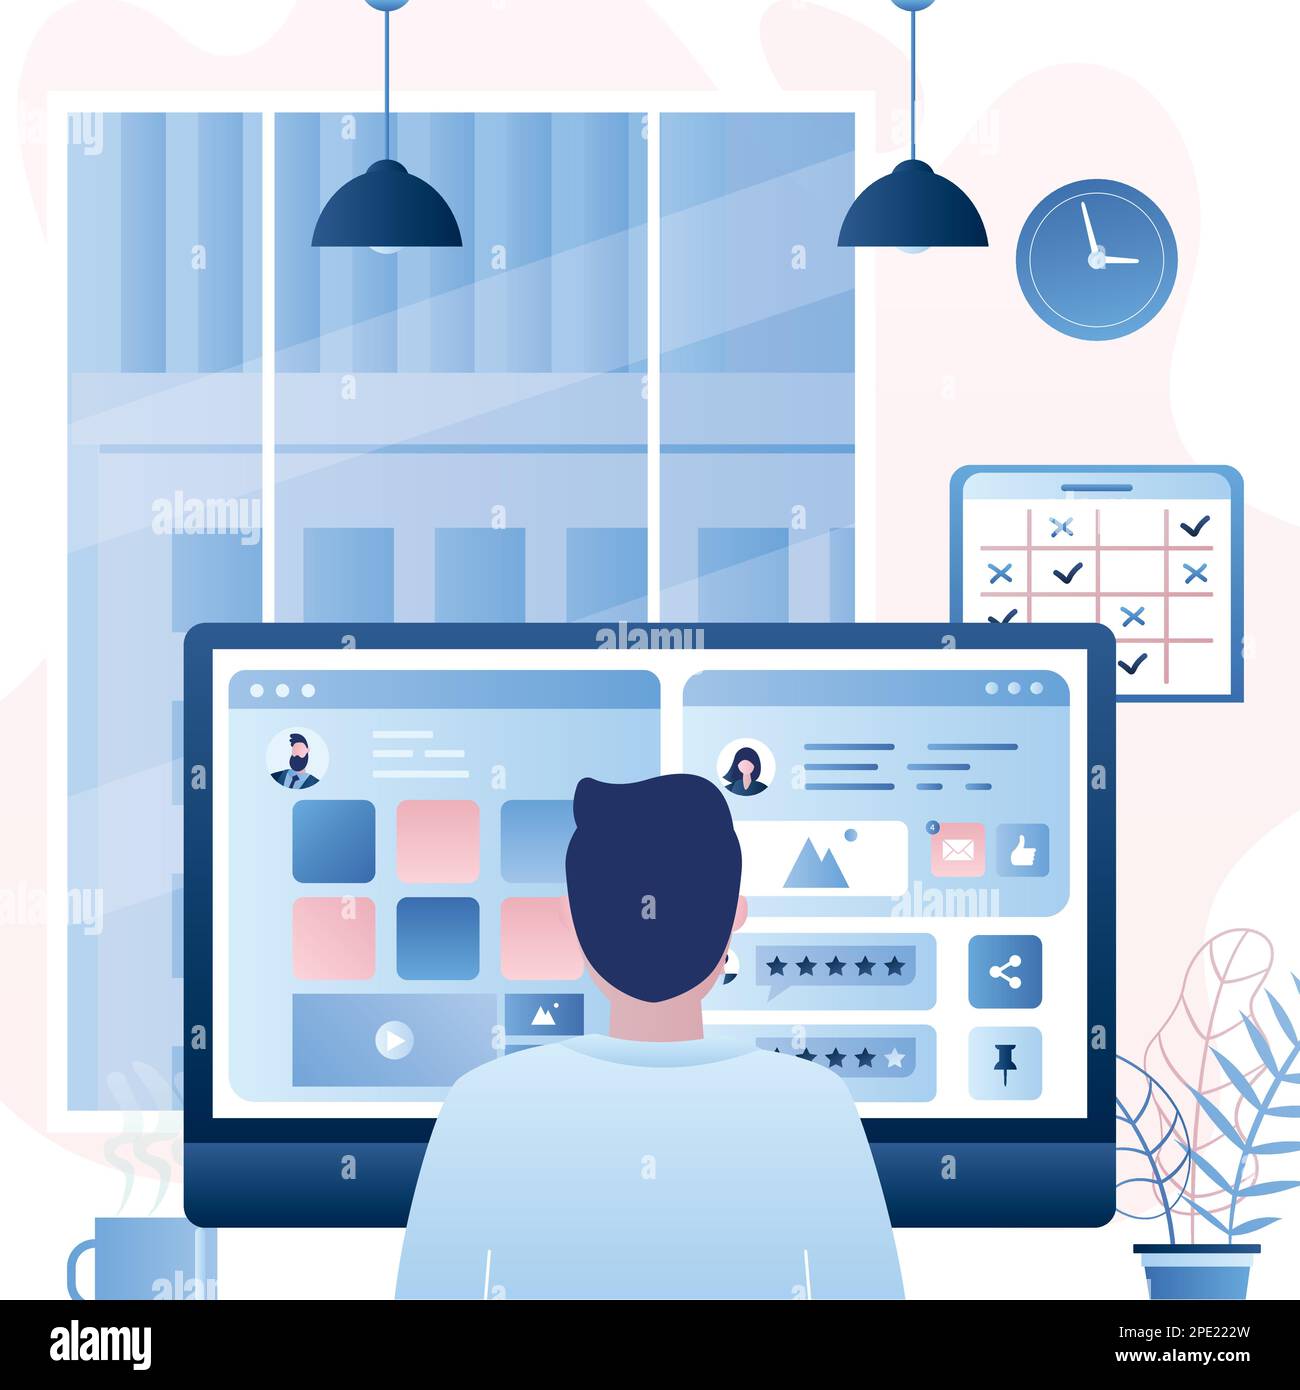 Man back view sits in front of the monitor screen. Social network chatting and work process. Office day concept background. Office room interior with Stock Vector